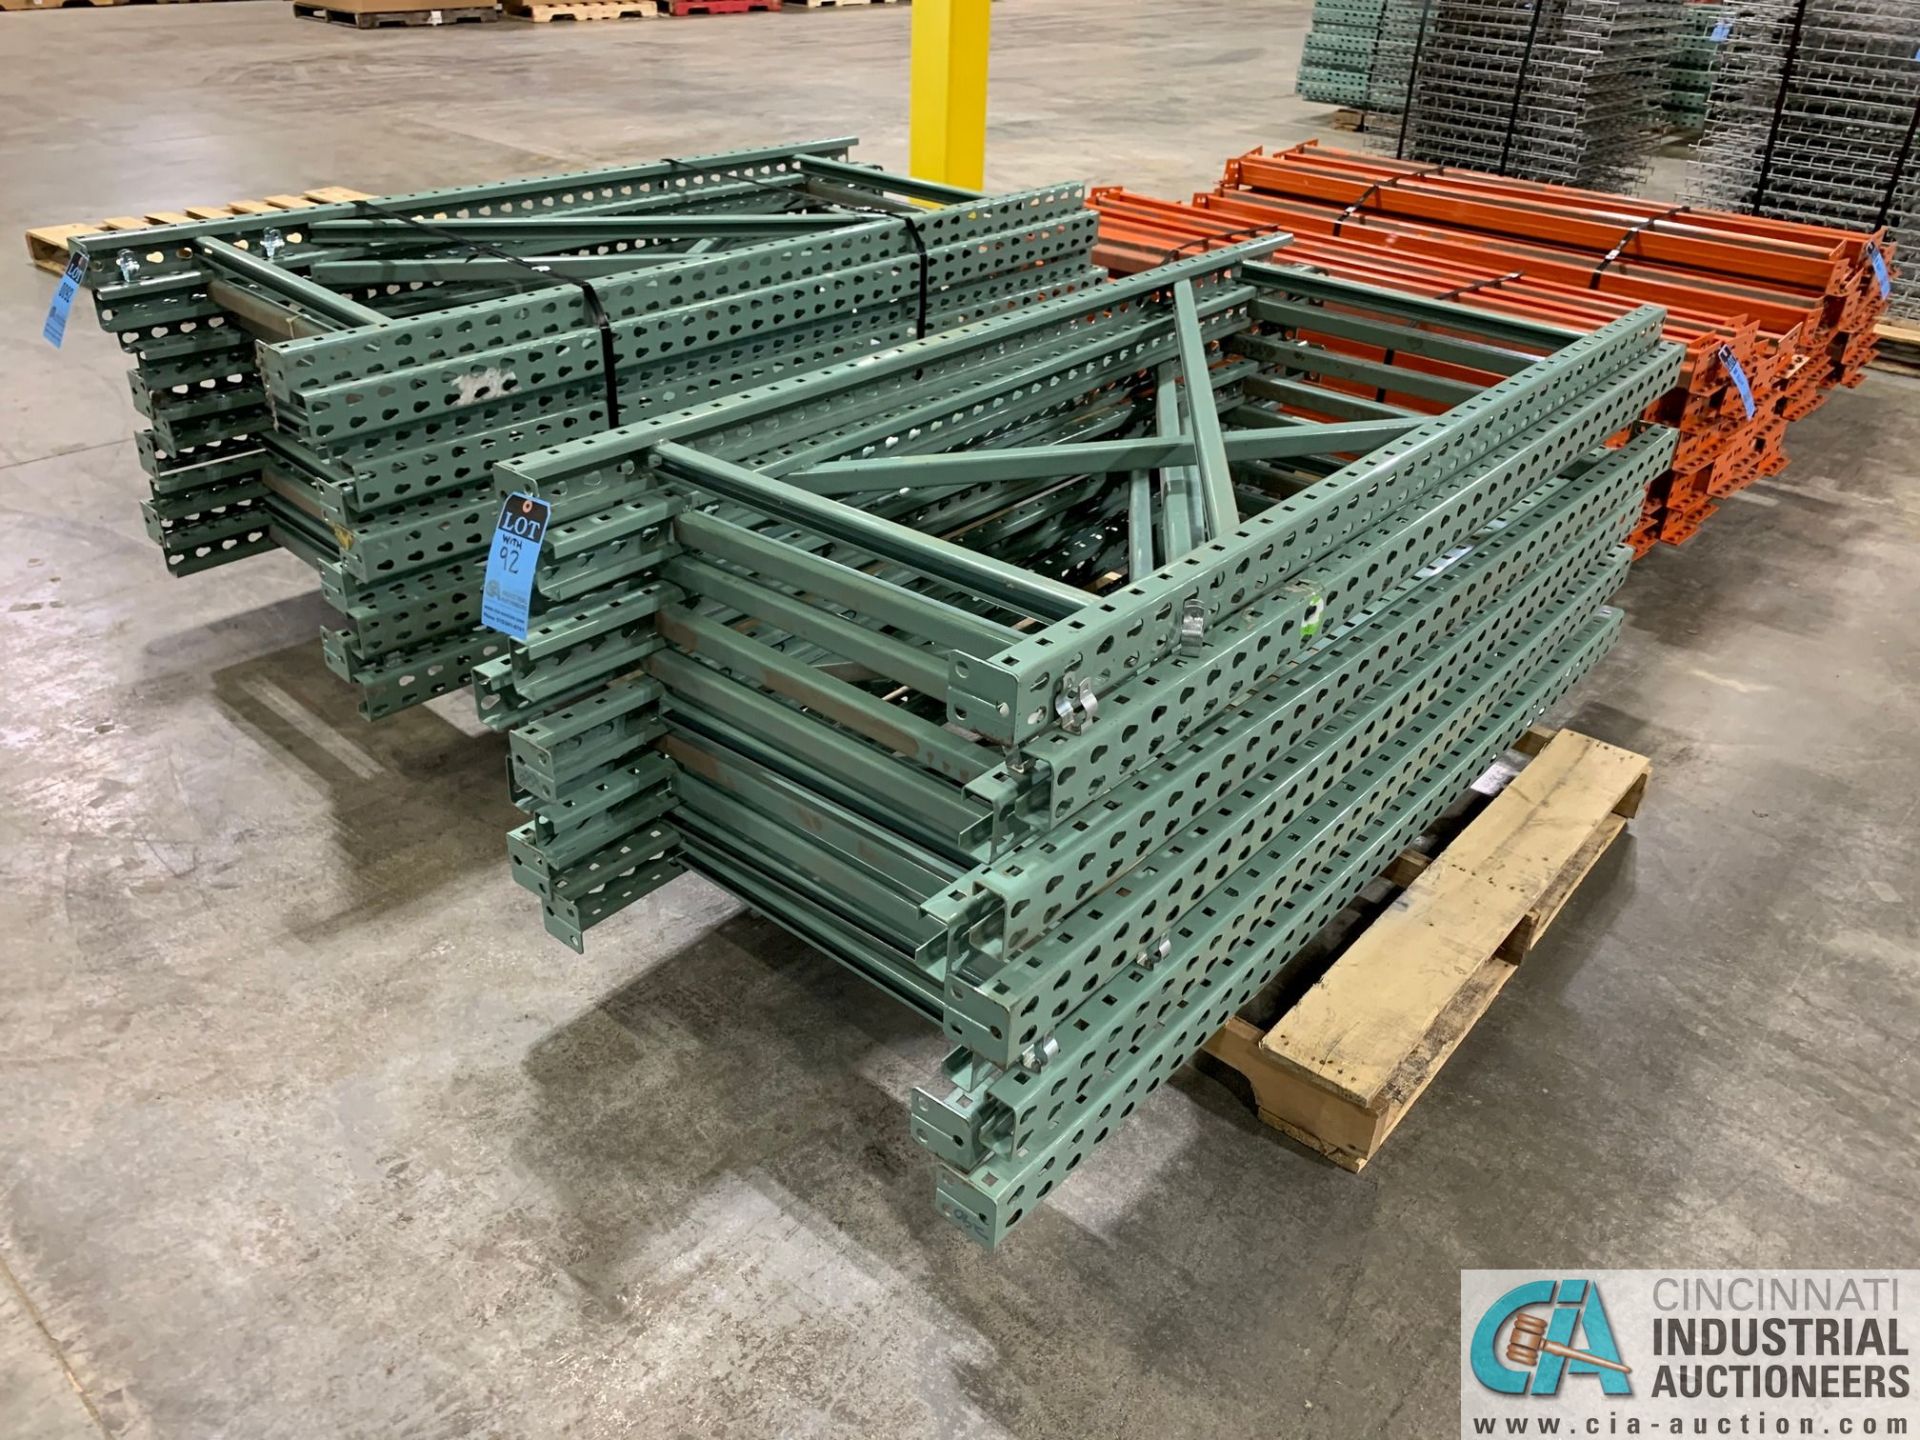 FREE-STANDING SECTIONS 30" X 72" X 72" HIGH ADJUSTABLE BEAM WIRE DECK PALLET RACK CONSISTING OF - Image 4 of 6